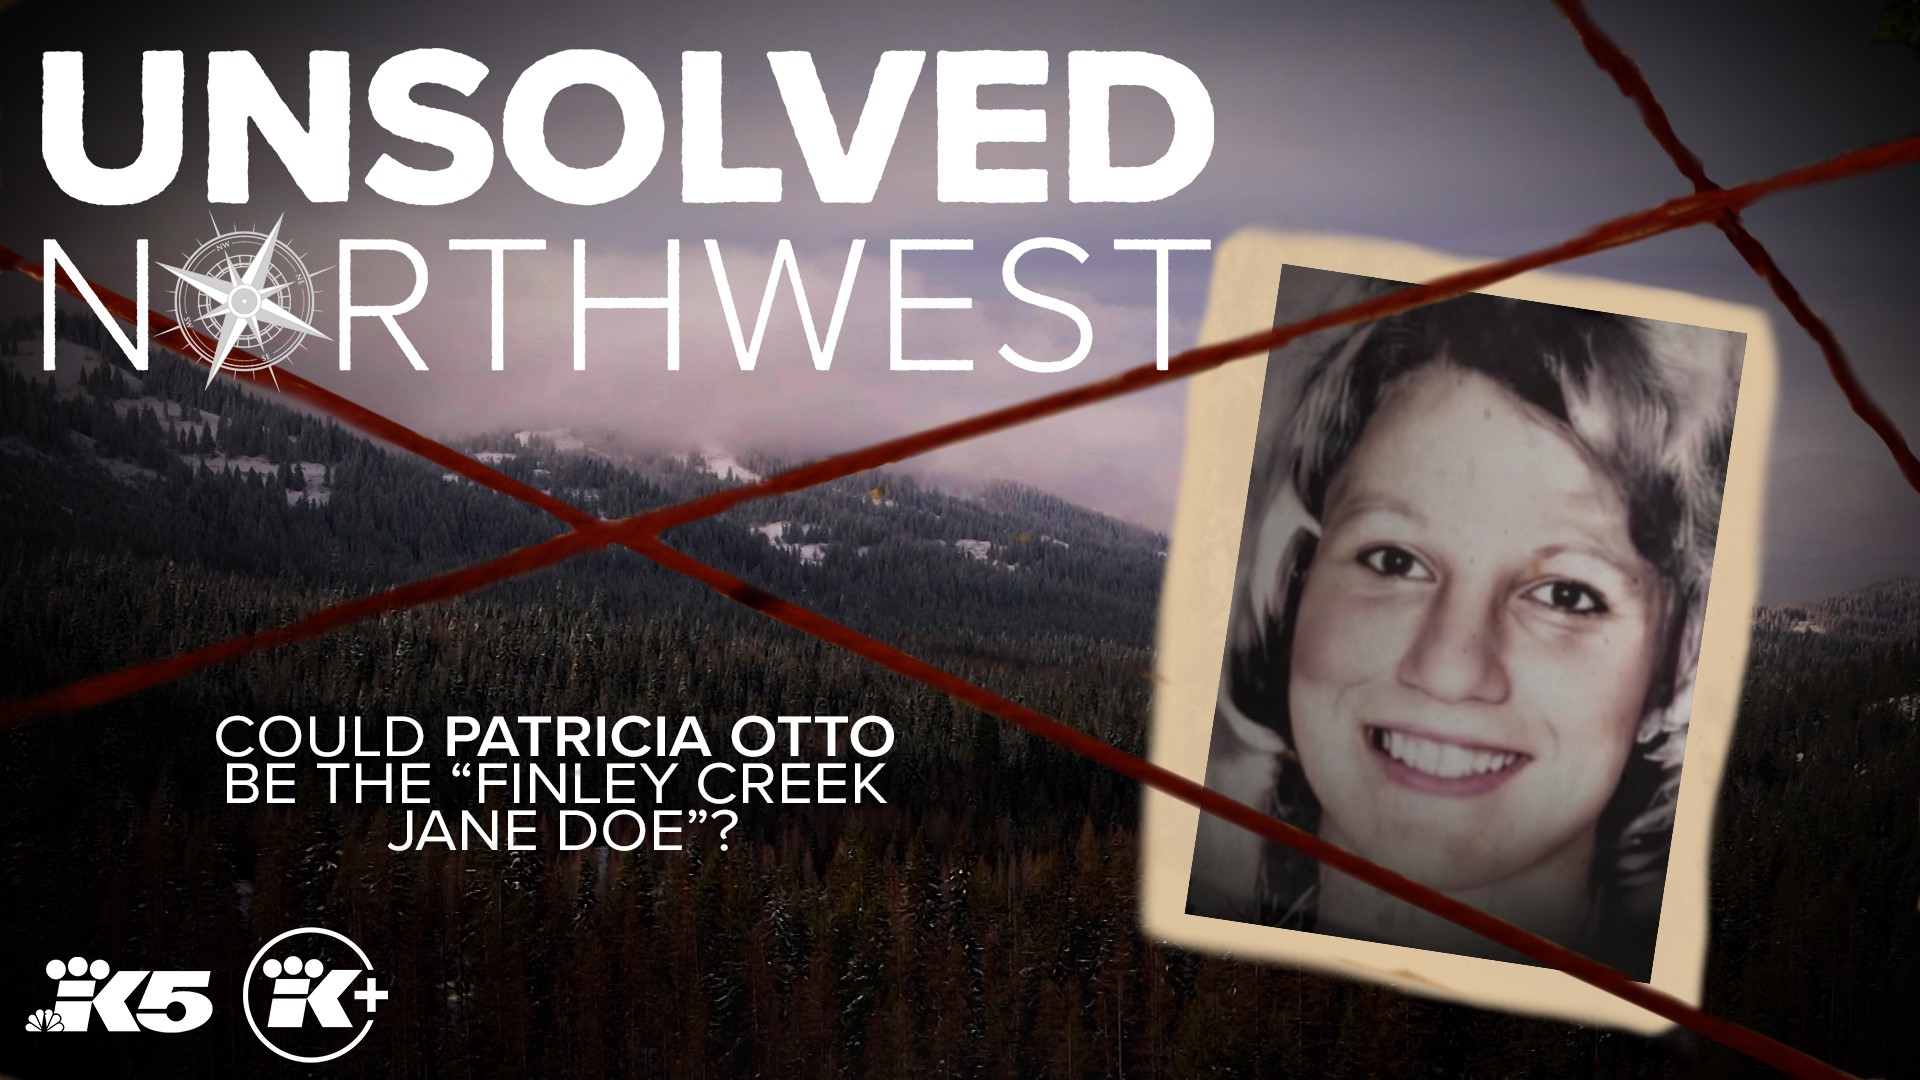 Patricia Otto was a 24-year-old mother who went missing from Lewiston, Idaho, in 1976. Now, some think she could be a Jane Doe found in Oregon two years later.